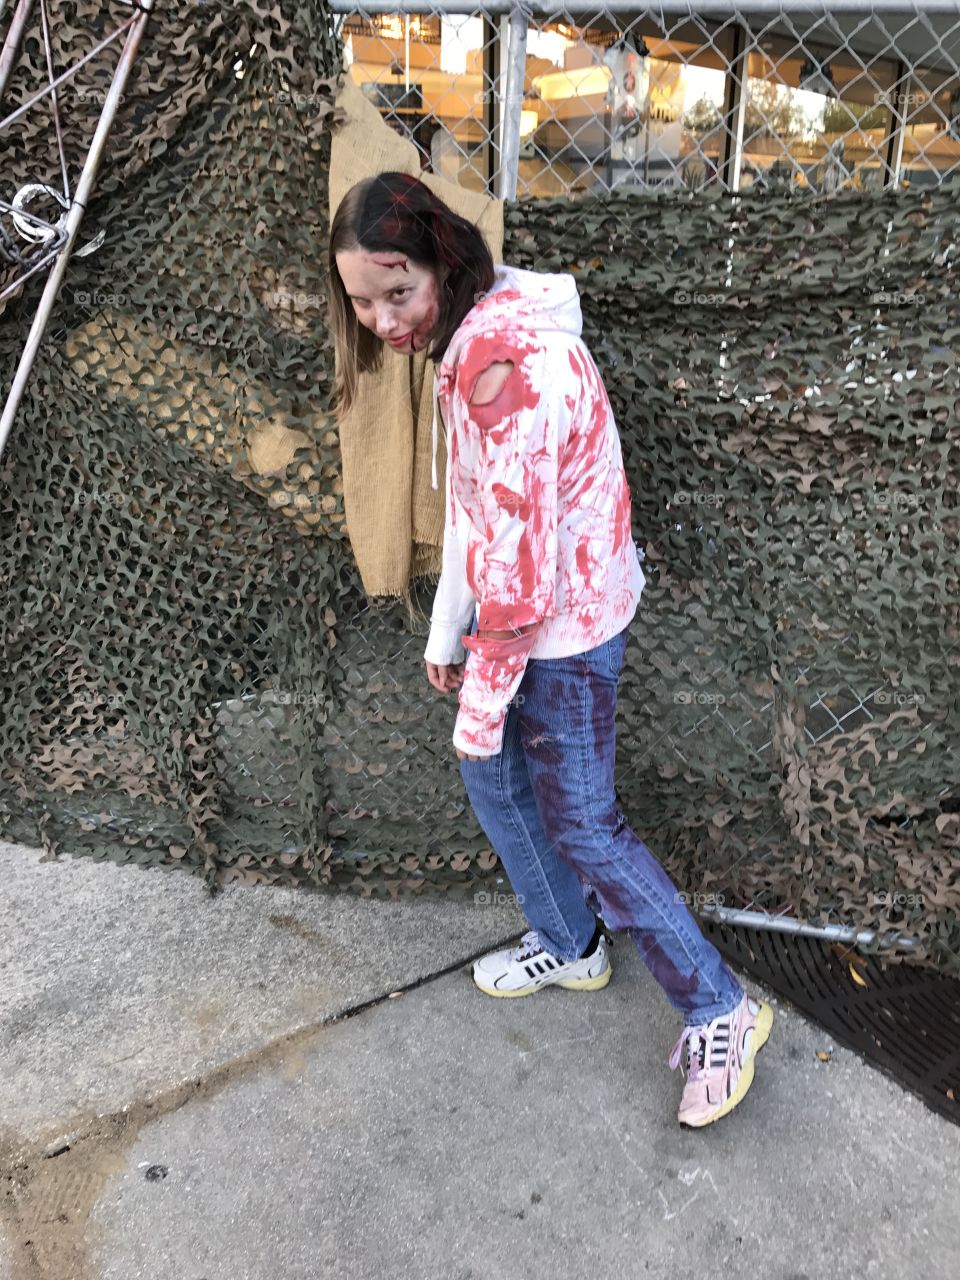 Look out! Half-dead zombie lurking at FrightFest!